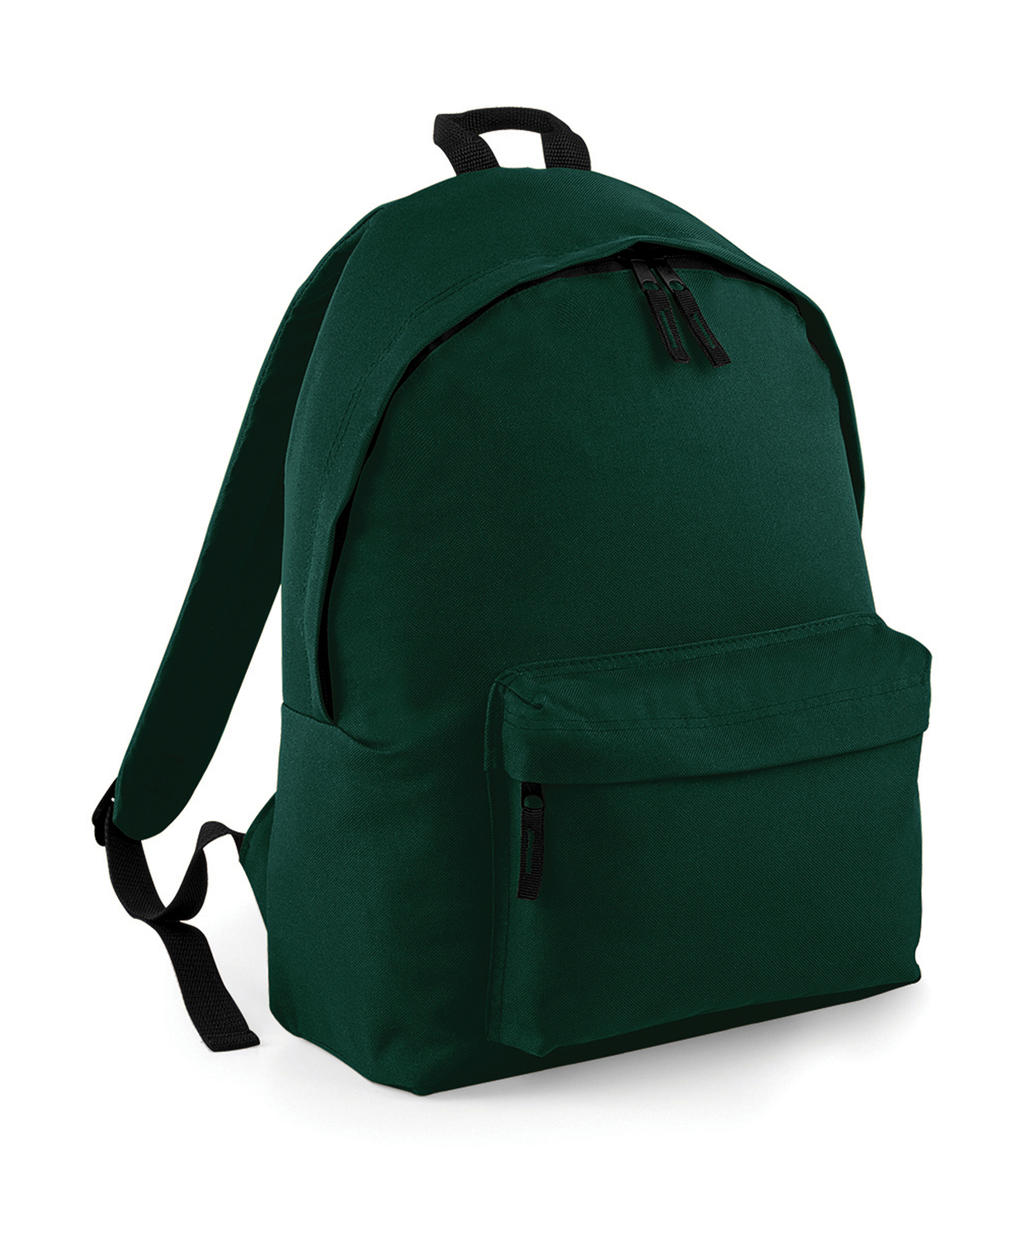  Original Fashion Backpack in Farbe Bottle Green